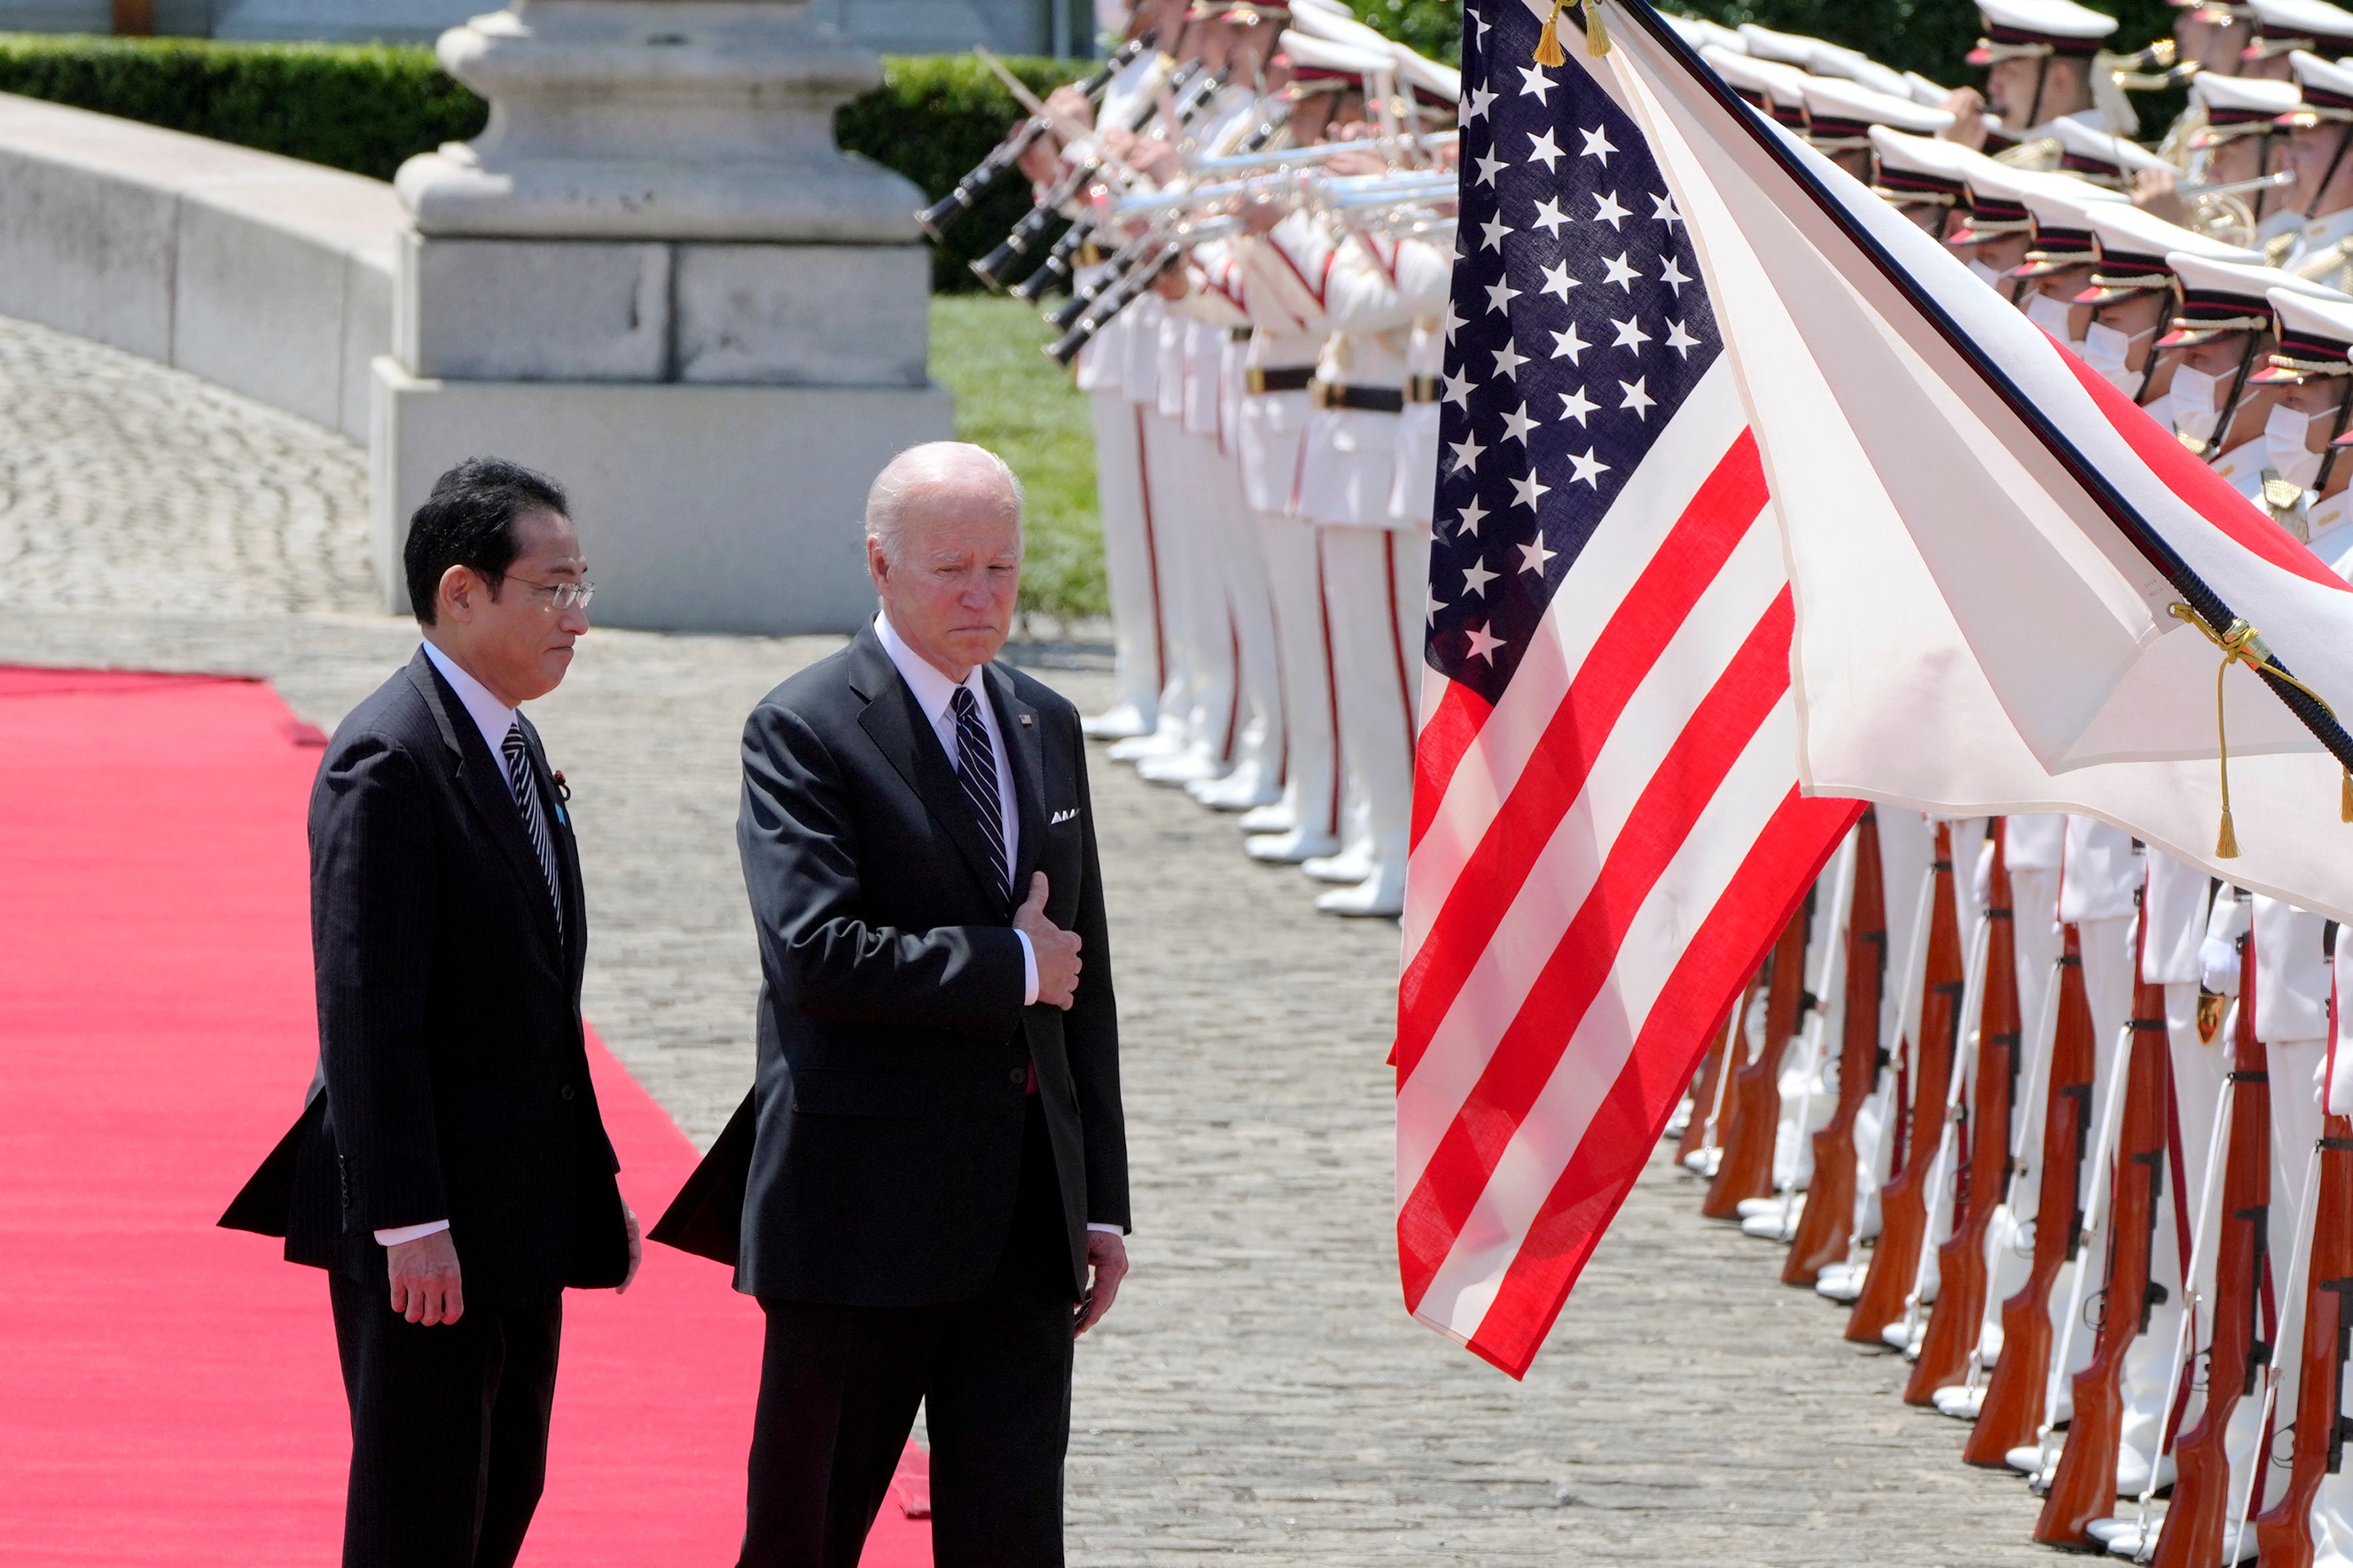 Welcome ceremony for U.S. President Joe Biden at the Akasaka Palace state guest house in Tokyo